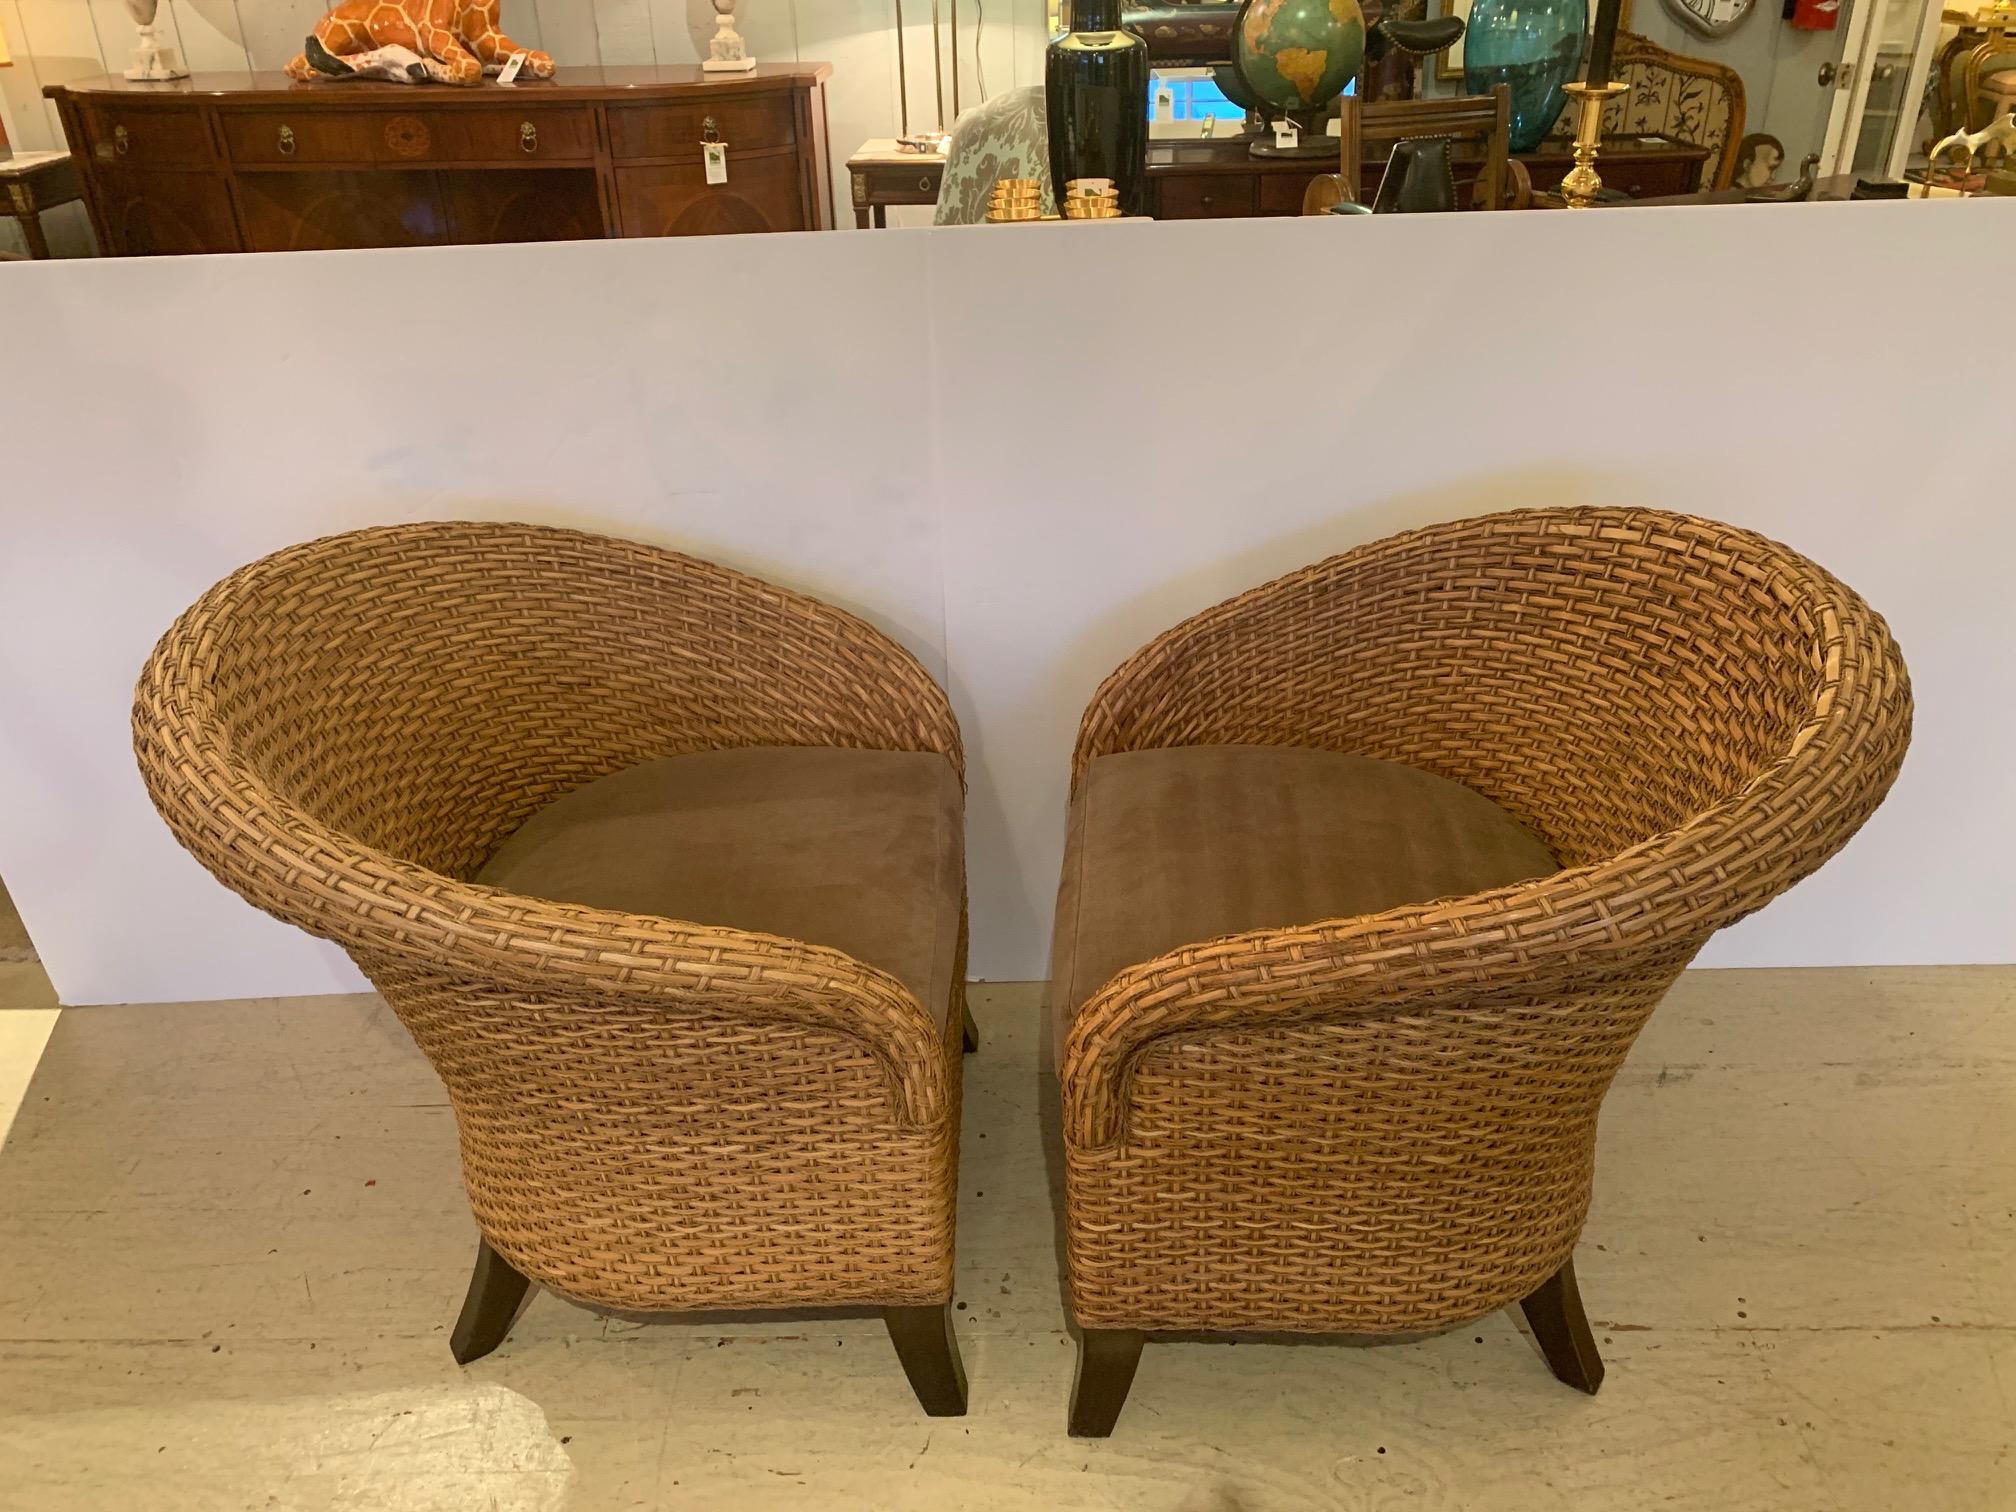 A handsome curvy barrel back shaped pair of woven rattan club chairs with custom seat cushions.

Size: Seat 20” D x 18” H.